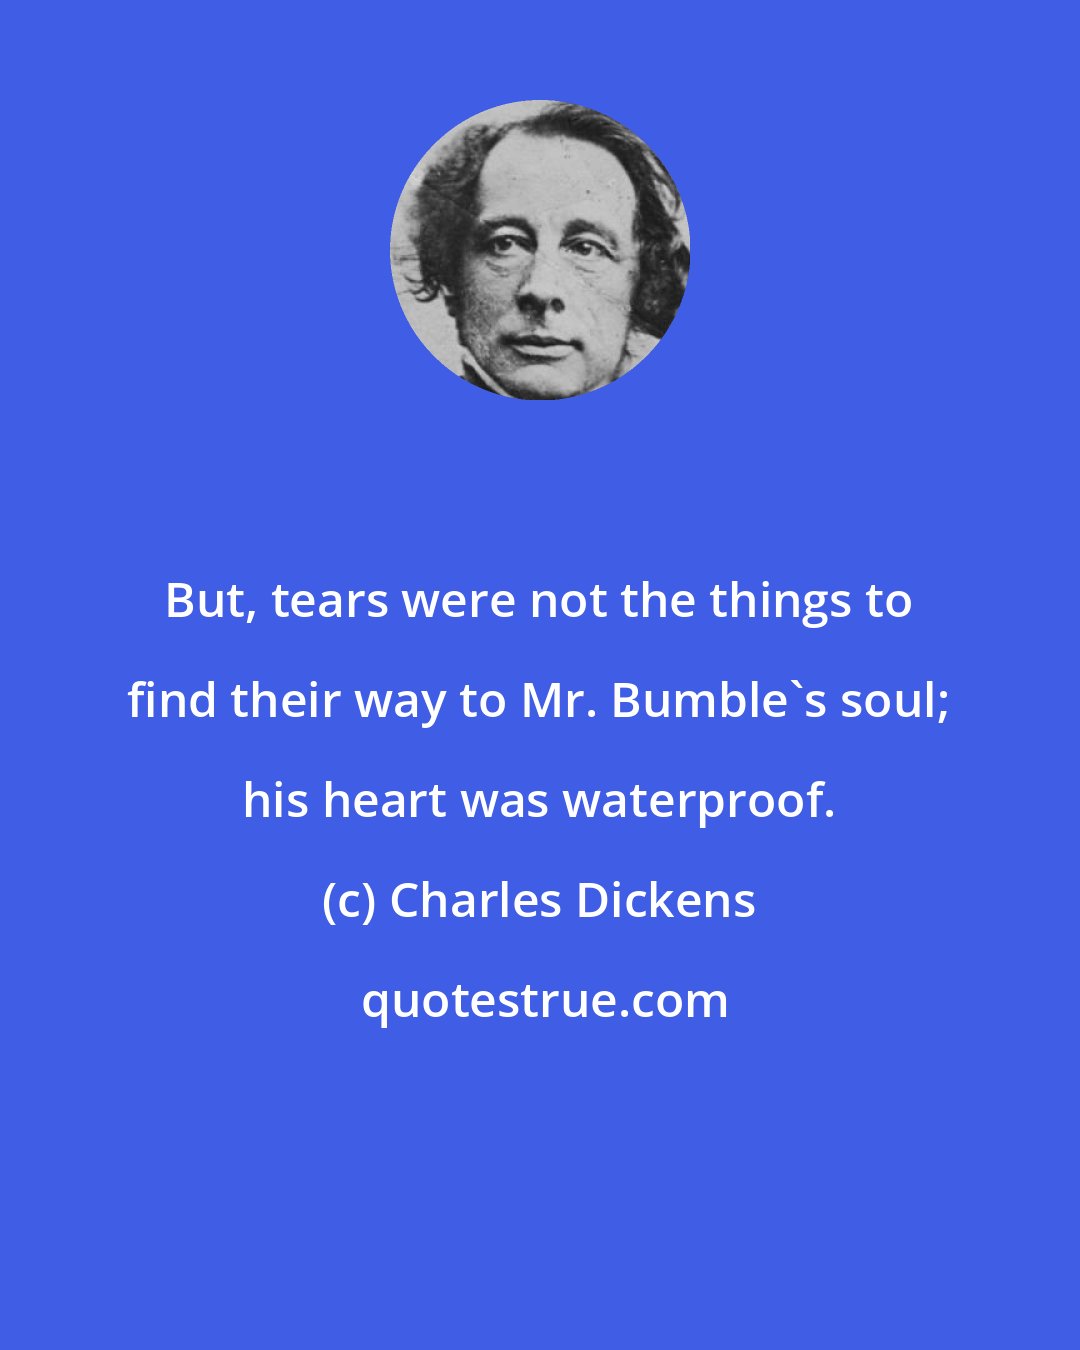 Charles Dickens: But, tears were not the things to find their way to Mr. Bumble's soul; his heart was waterproof.